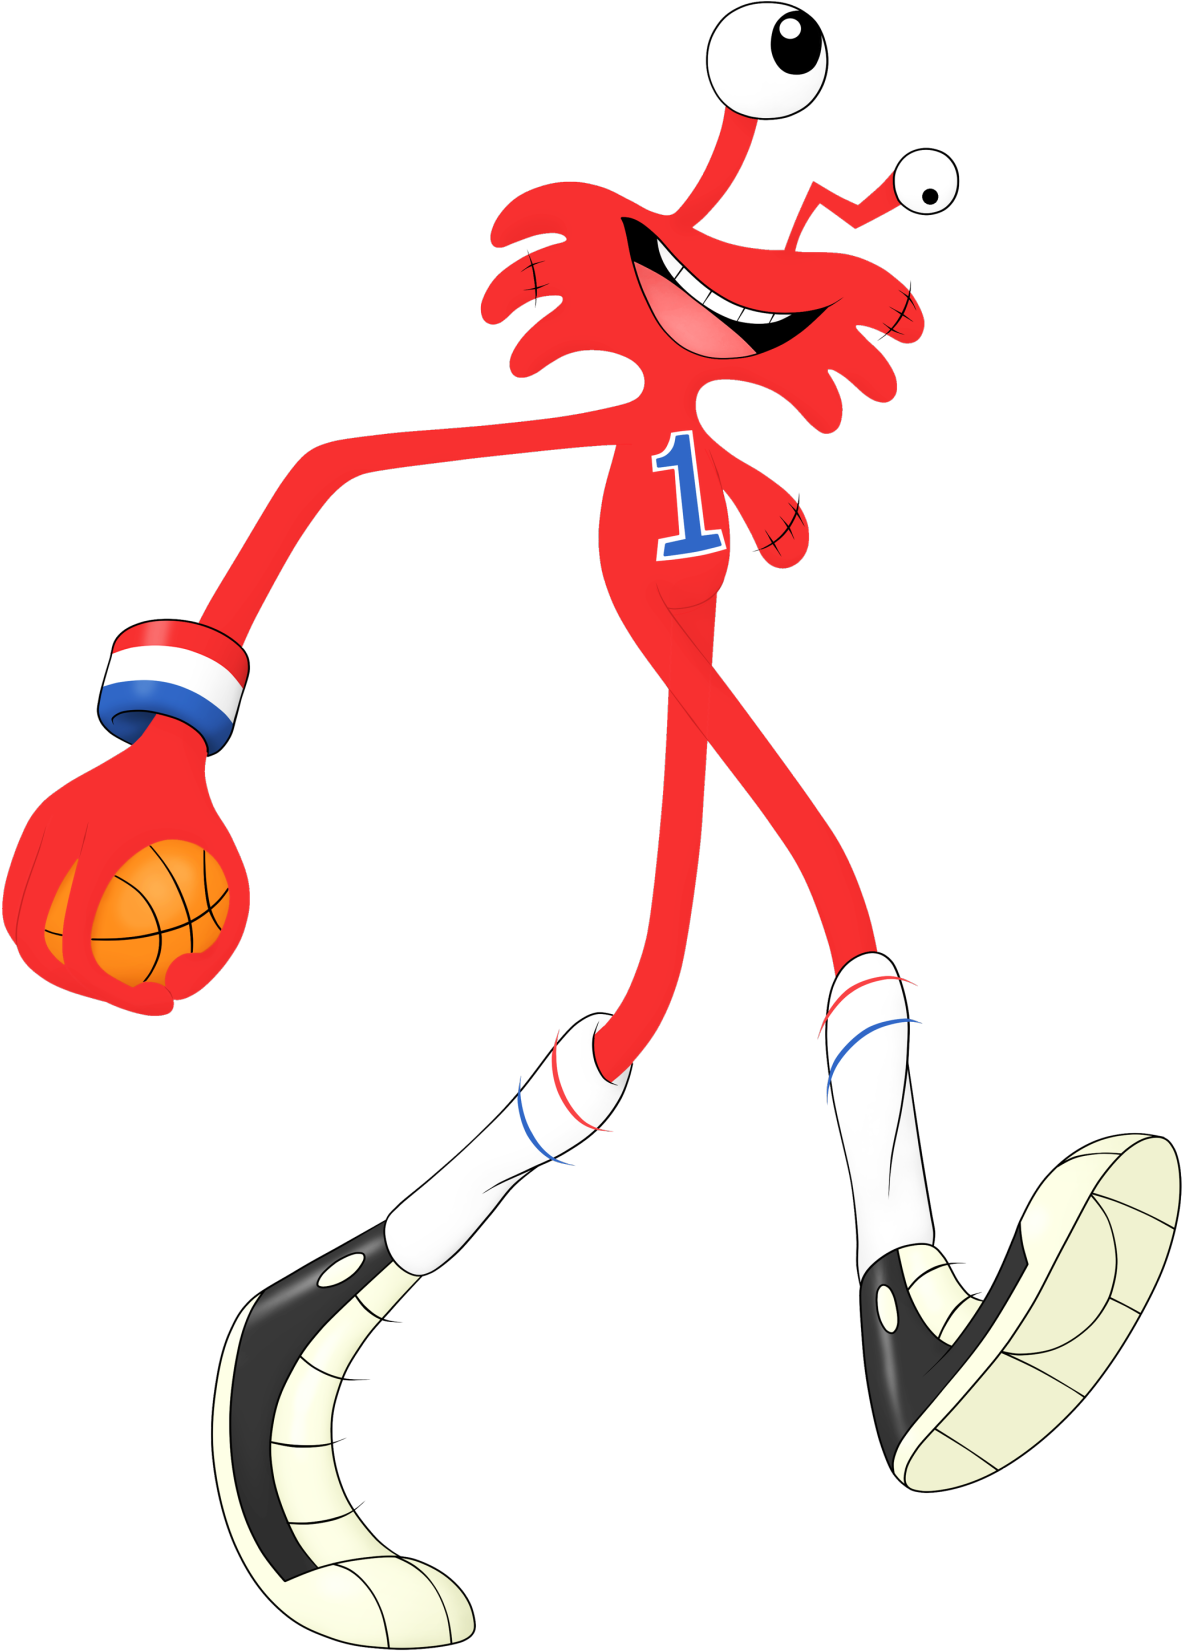 Wilt foster's home for imaginary friends basketball